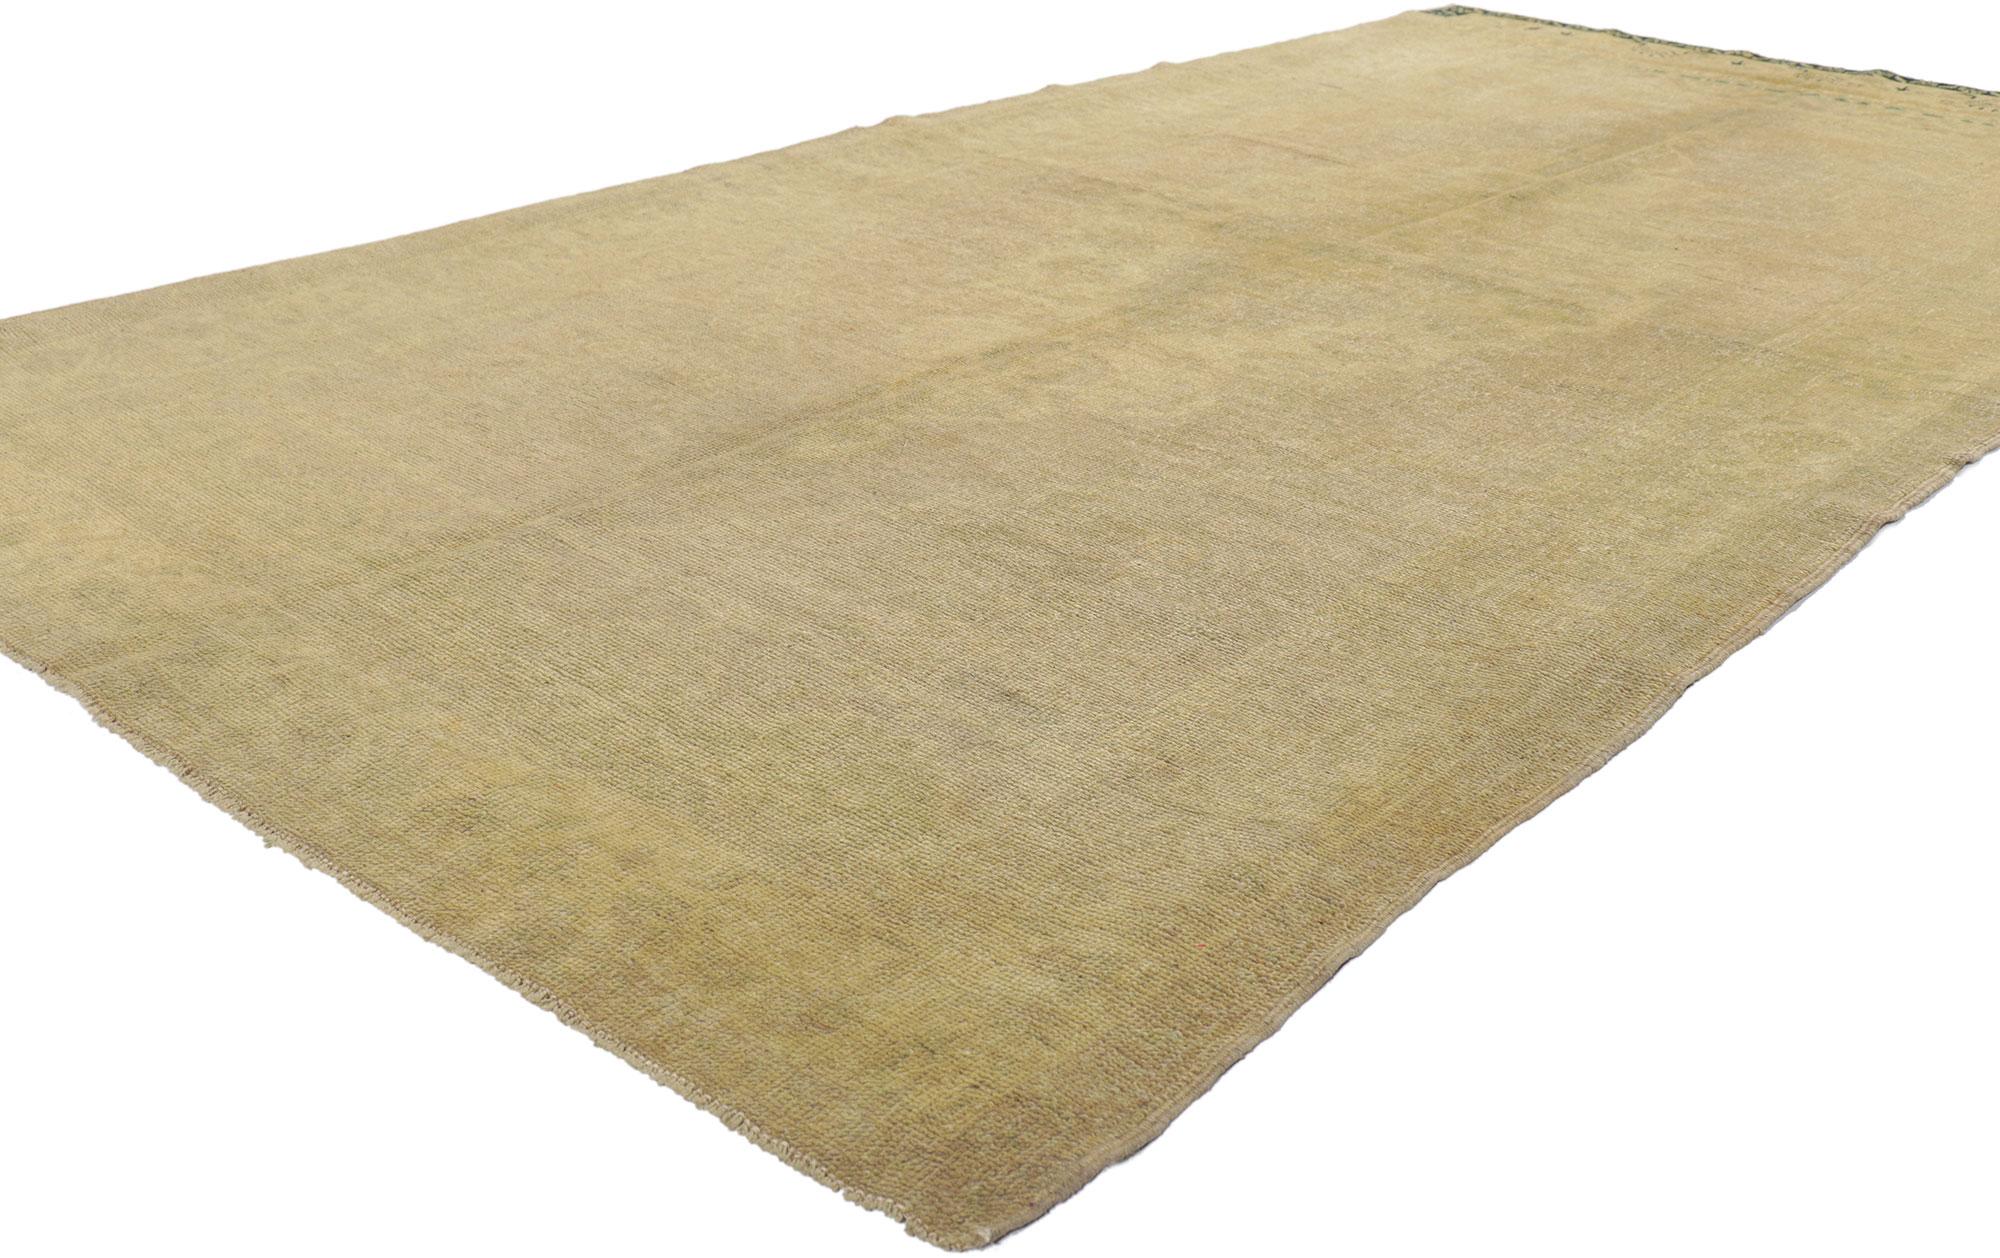 51030 Vintage Turkish Oushak Rug, 04'05 x 08'06. Warm and inviting with simplistic style, this hand knotted wool vintage Turkish Oushak rug is a captivating vision of woven beauty. The faded botanical pattern and soft earth-tone colors woven into